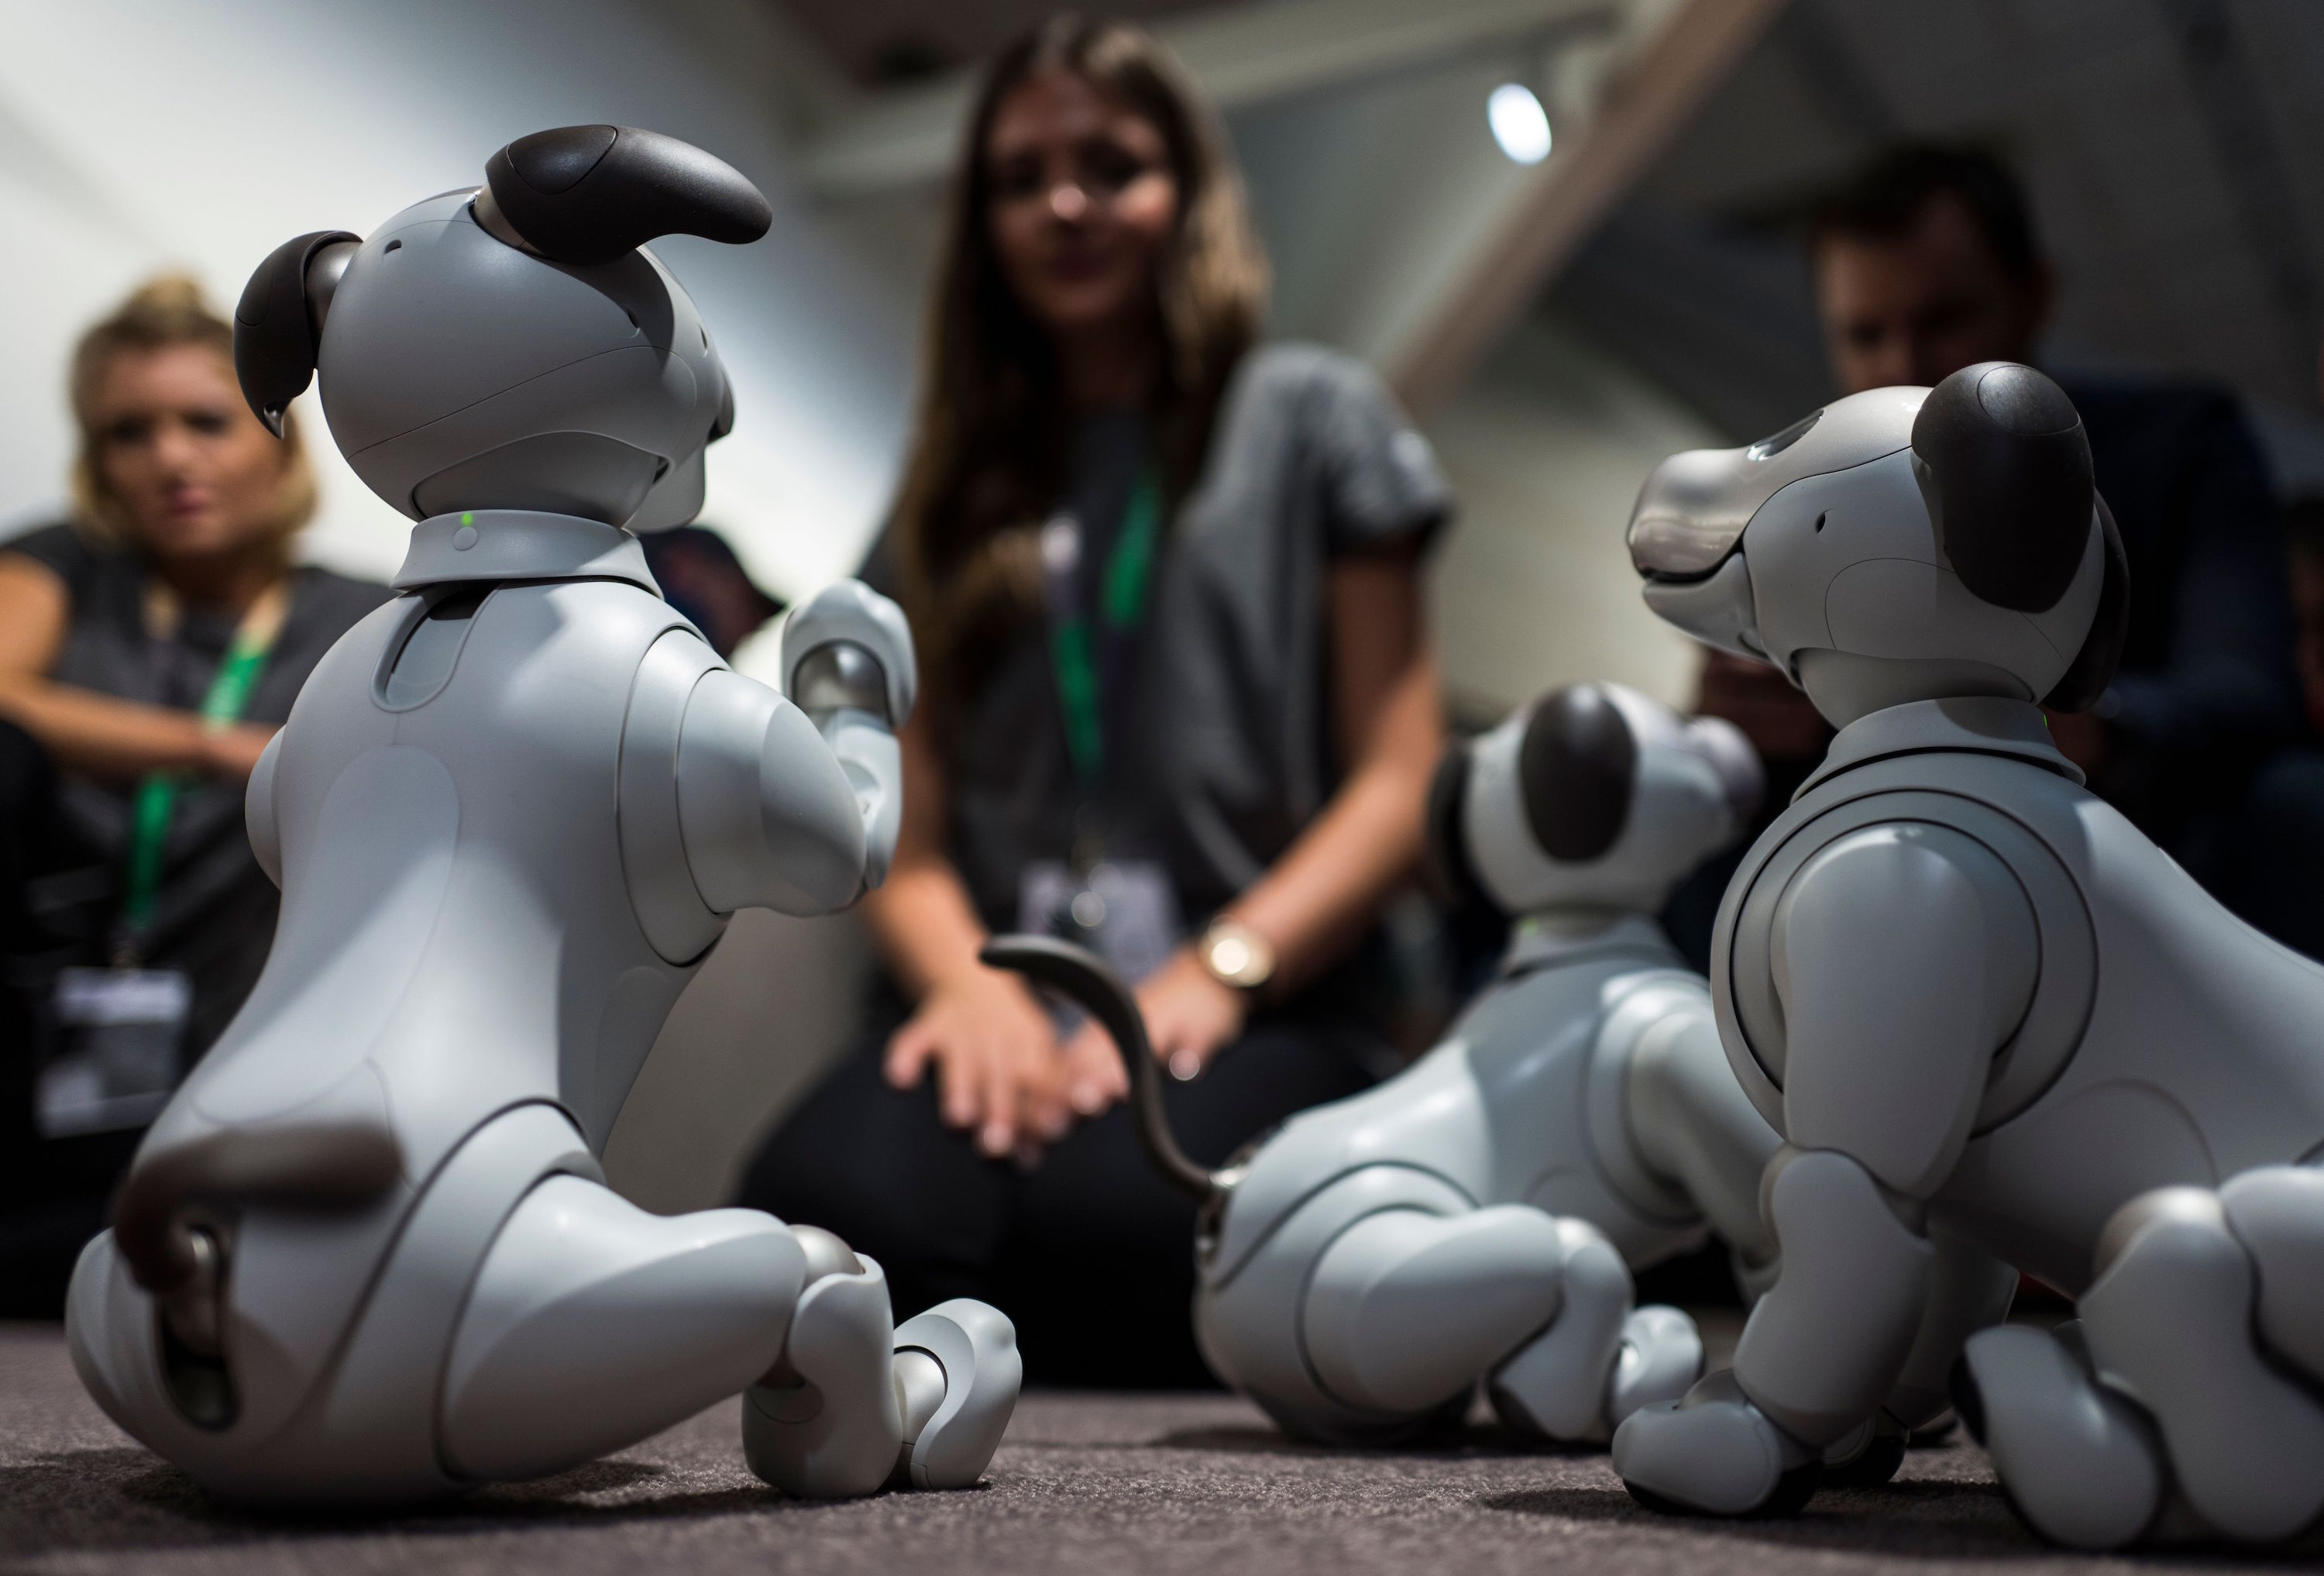 A hostess plays with fourth generation ERS-1000 "Aibo" robotic pets at the Sony stand during a preview day of the IFA. The Aibo will reach the US market this week. (Photo by JOHN MACDOUGALL/AFP/Getty Images)